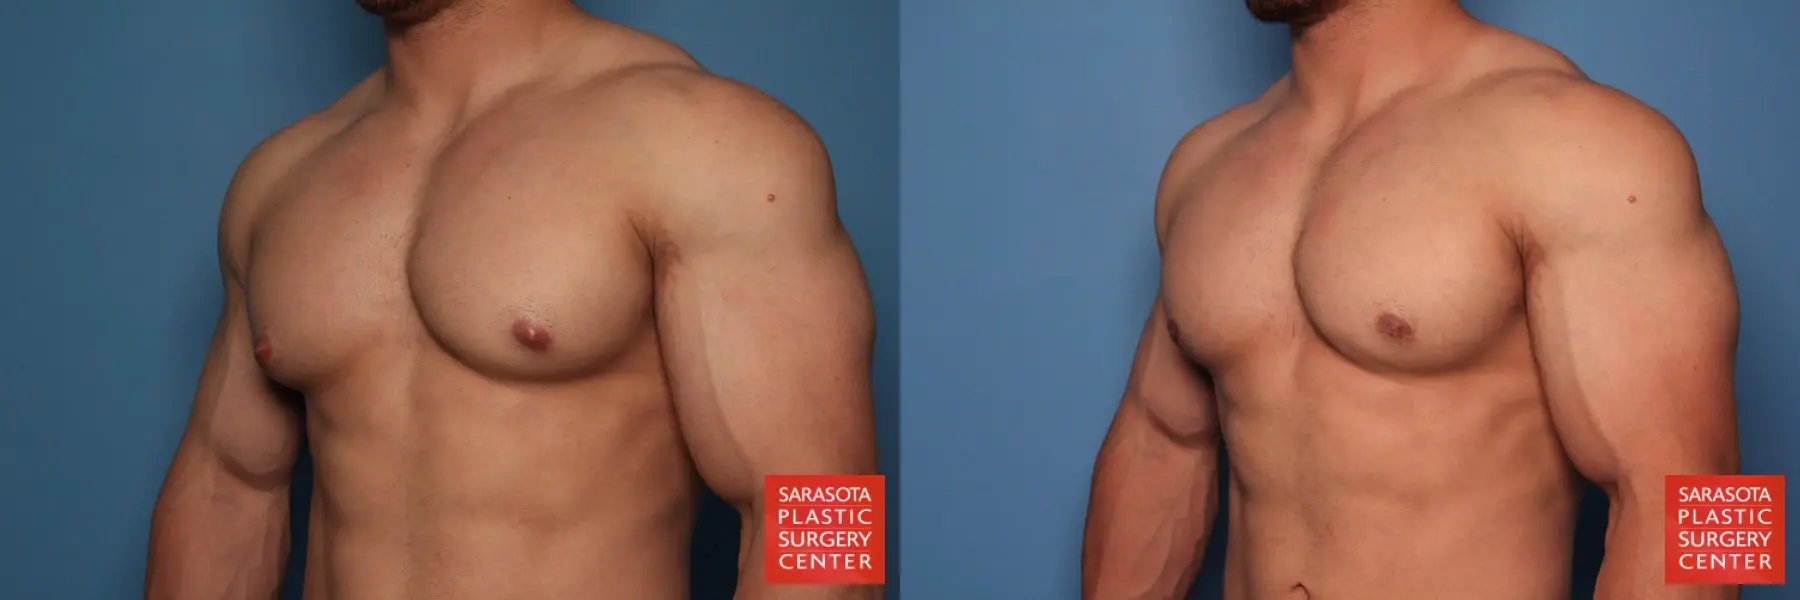 Gynecomastia: Patient 6 - Before and After 2